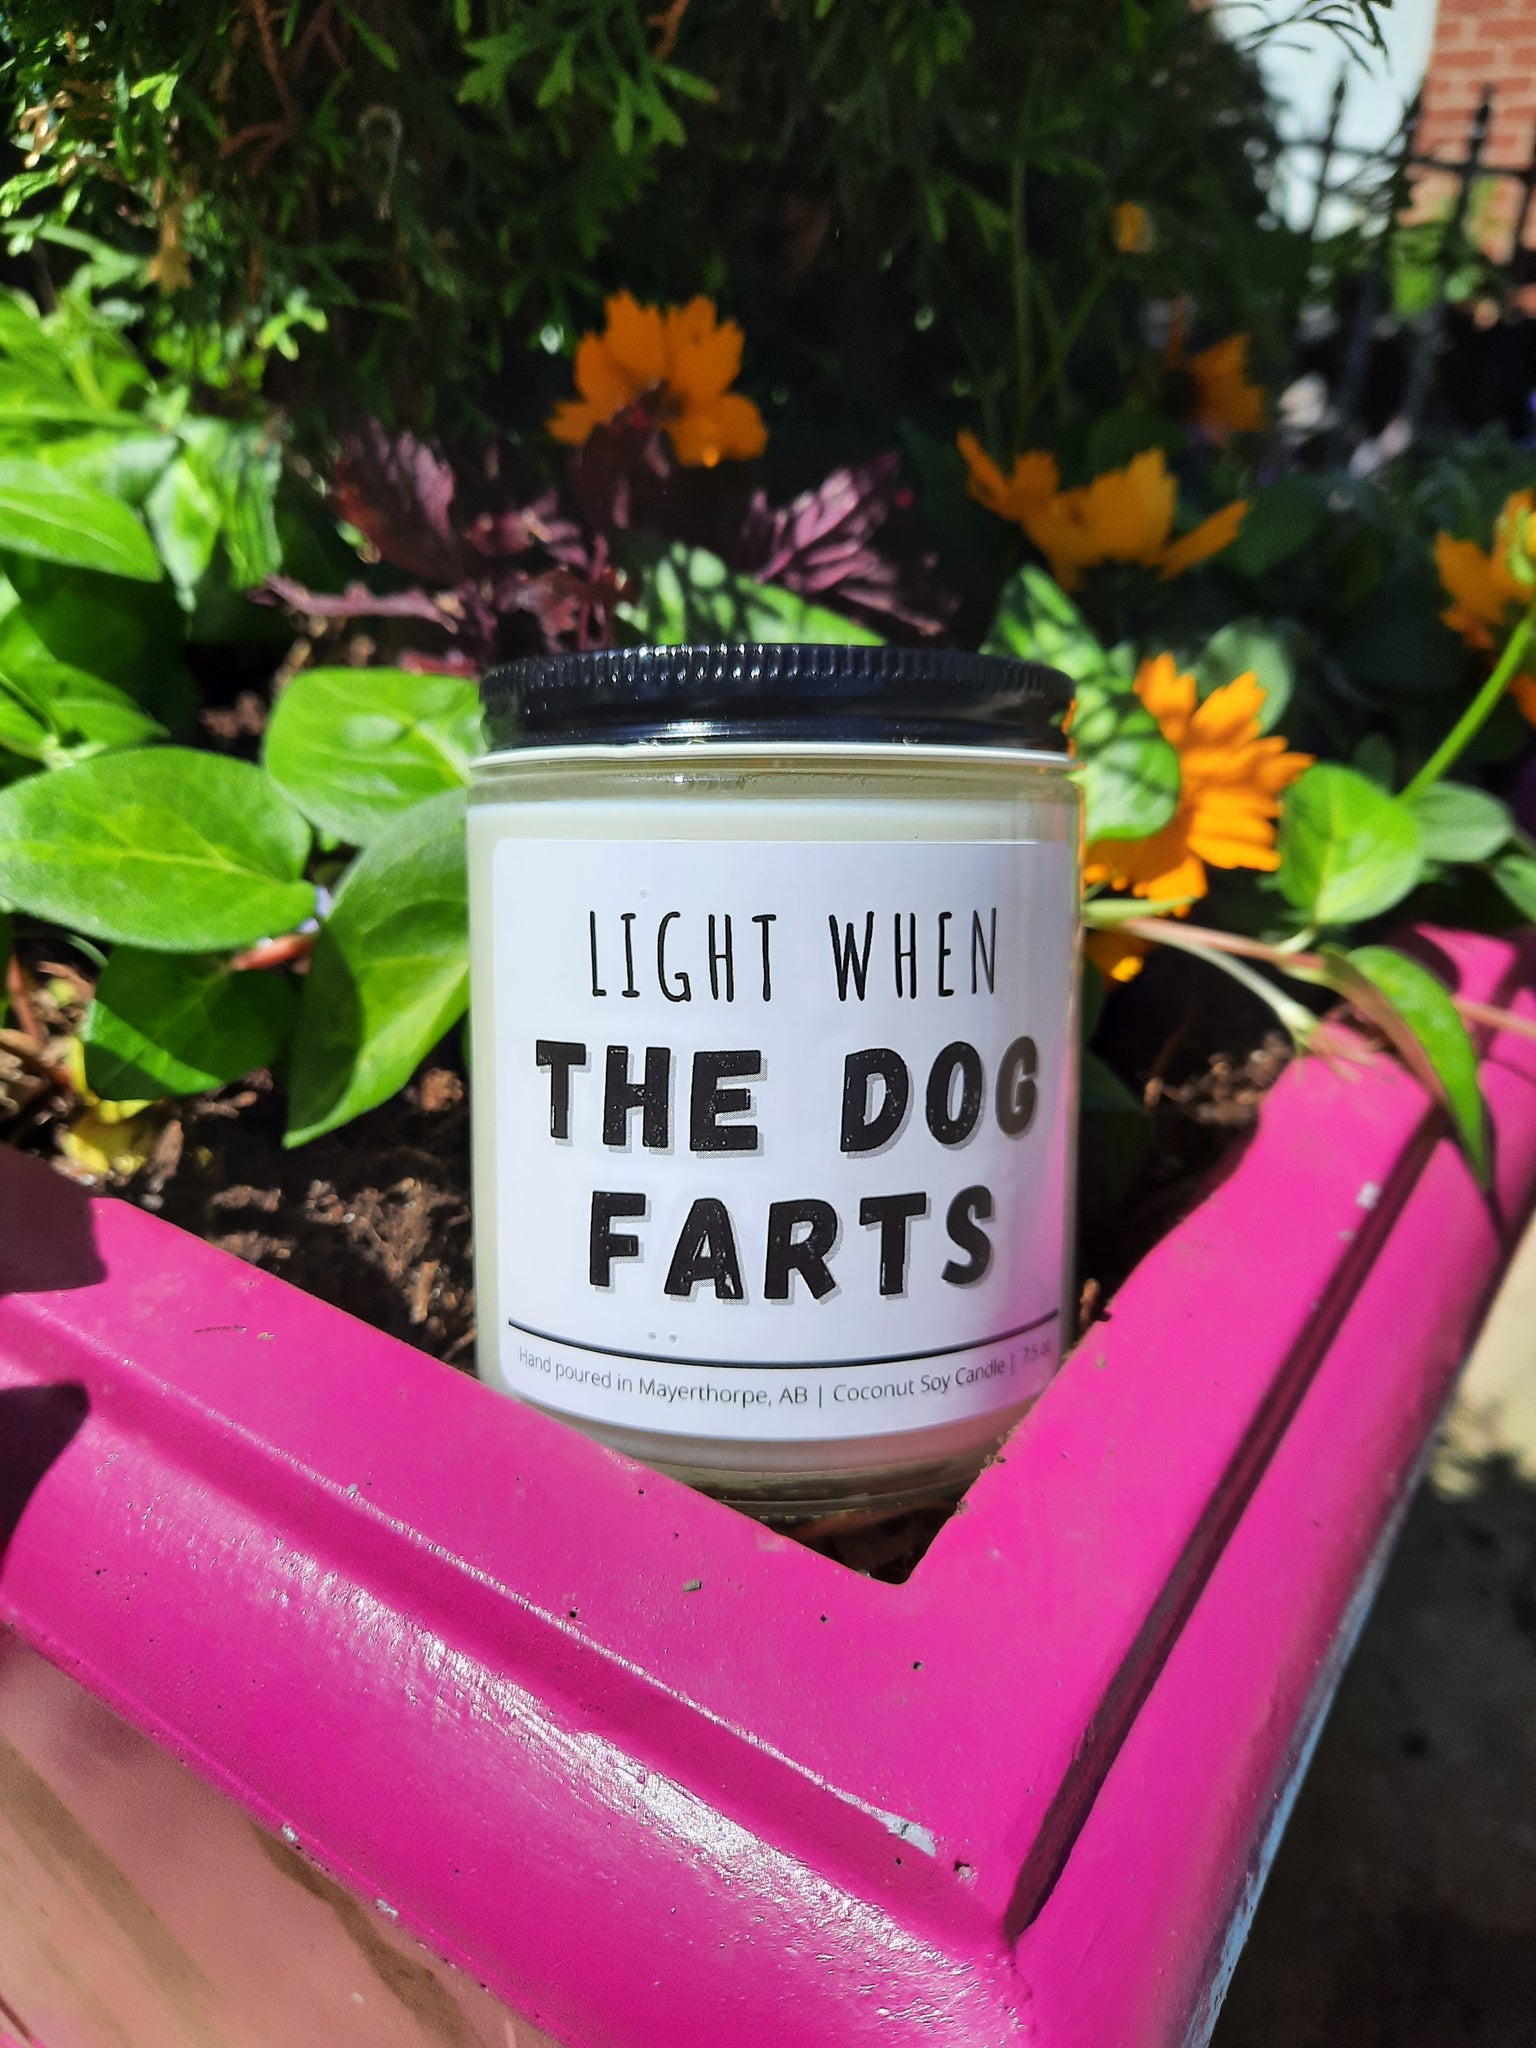 Light When the Dog Farts Candle